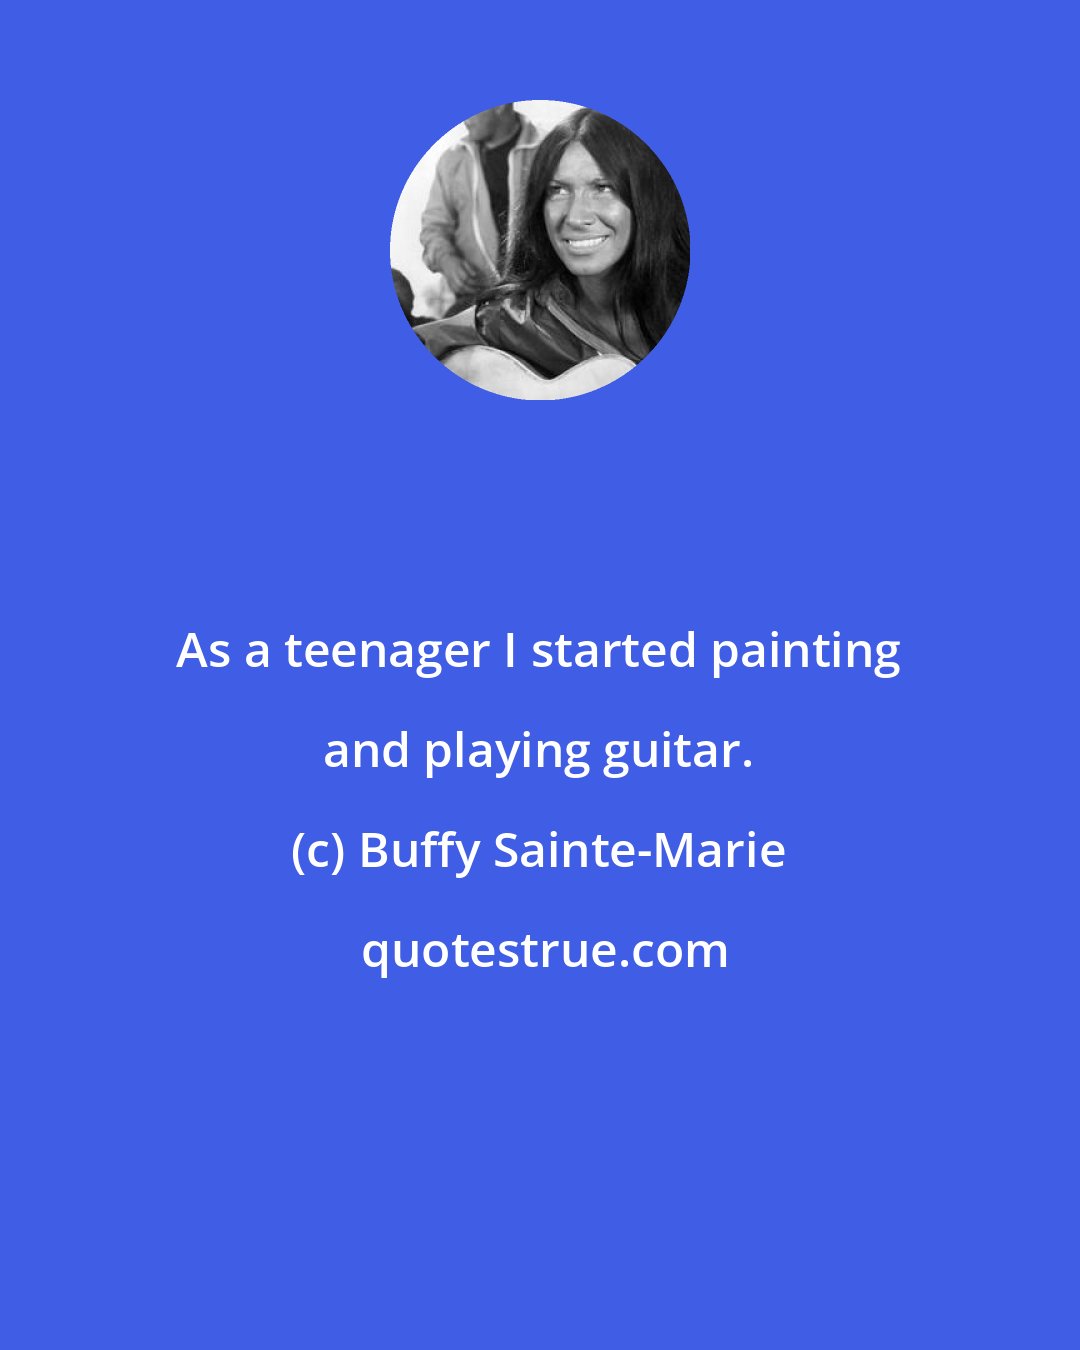 Buffy Sainte-Marie: As a teenager I started painting and playing guitar.